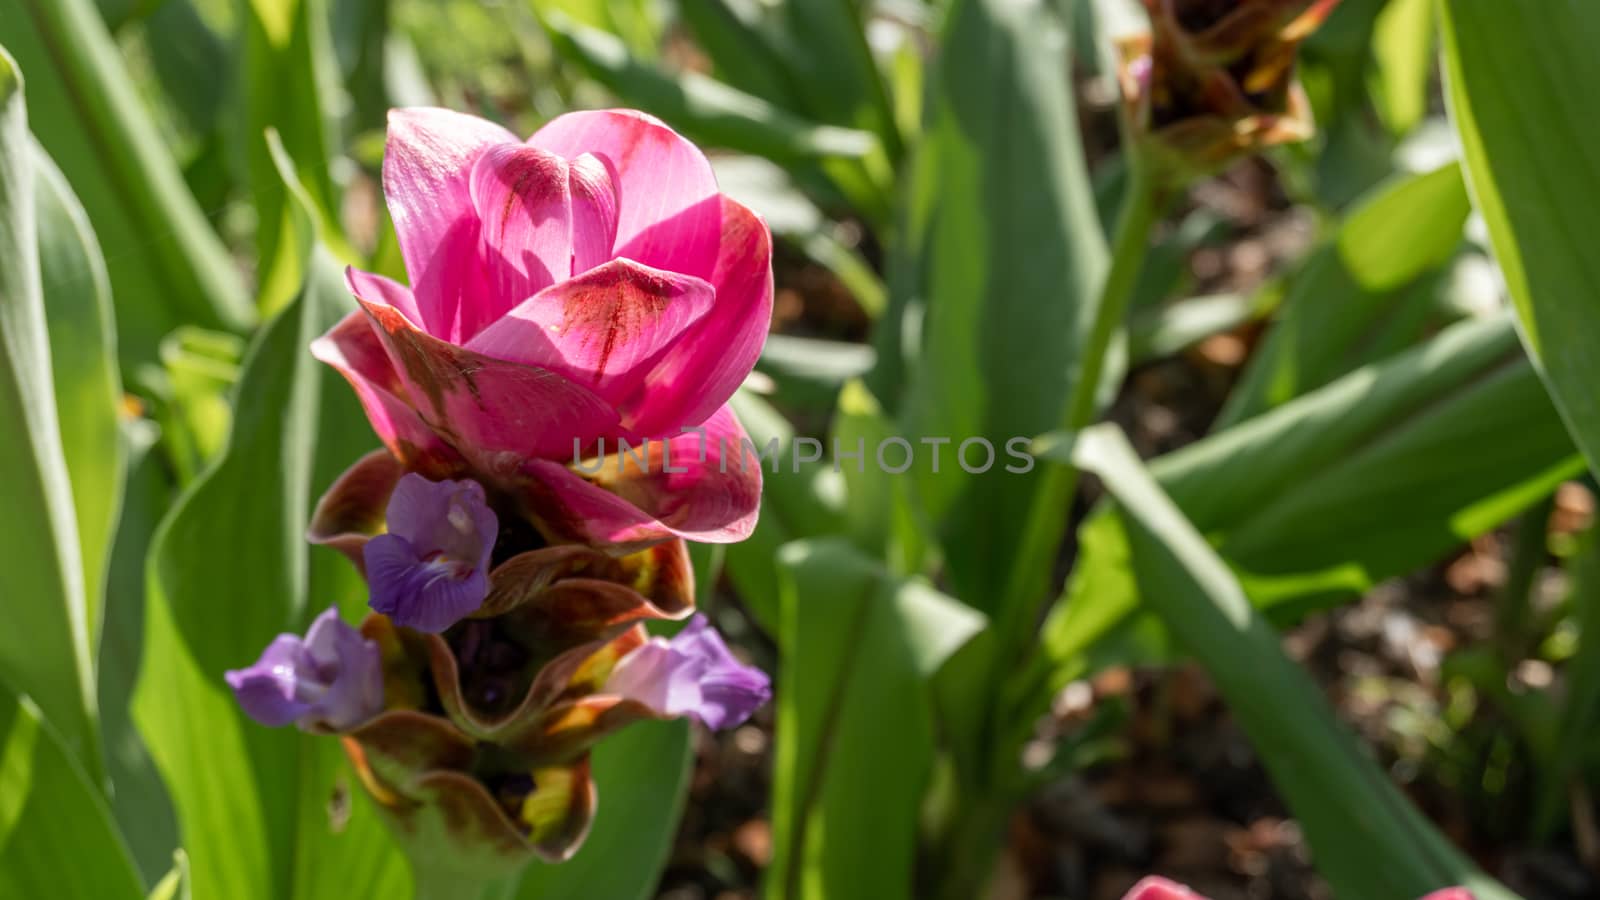 Pink Siam Tulip or Curcuma alismatifolia is a herbaceous perennial plant producing clumps of erect